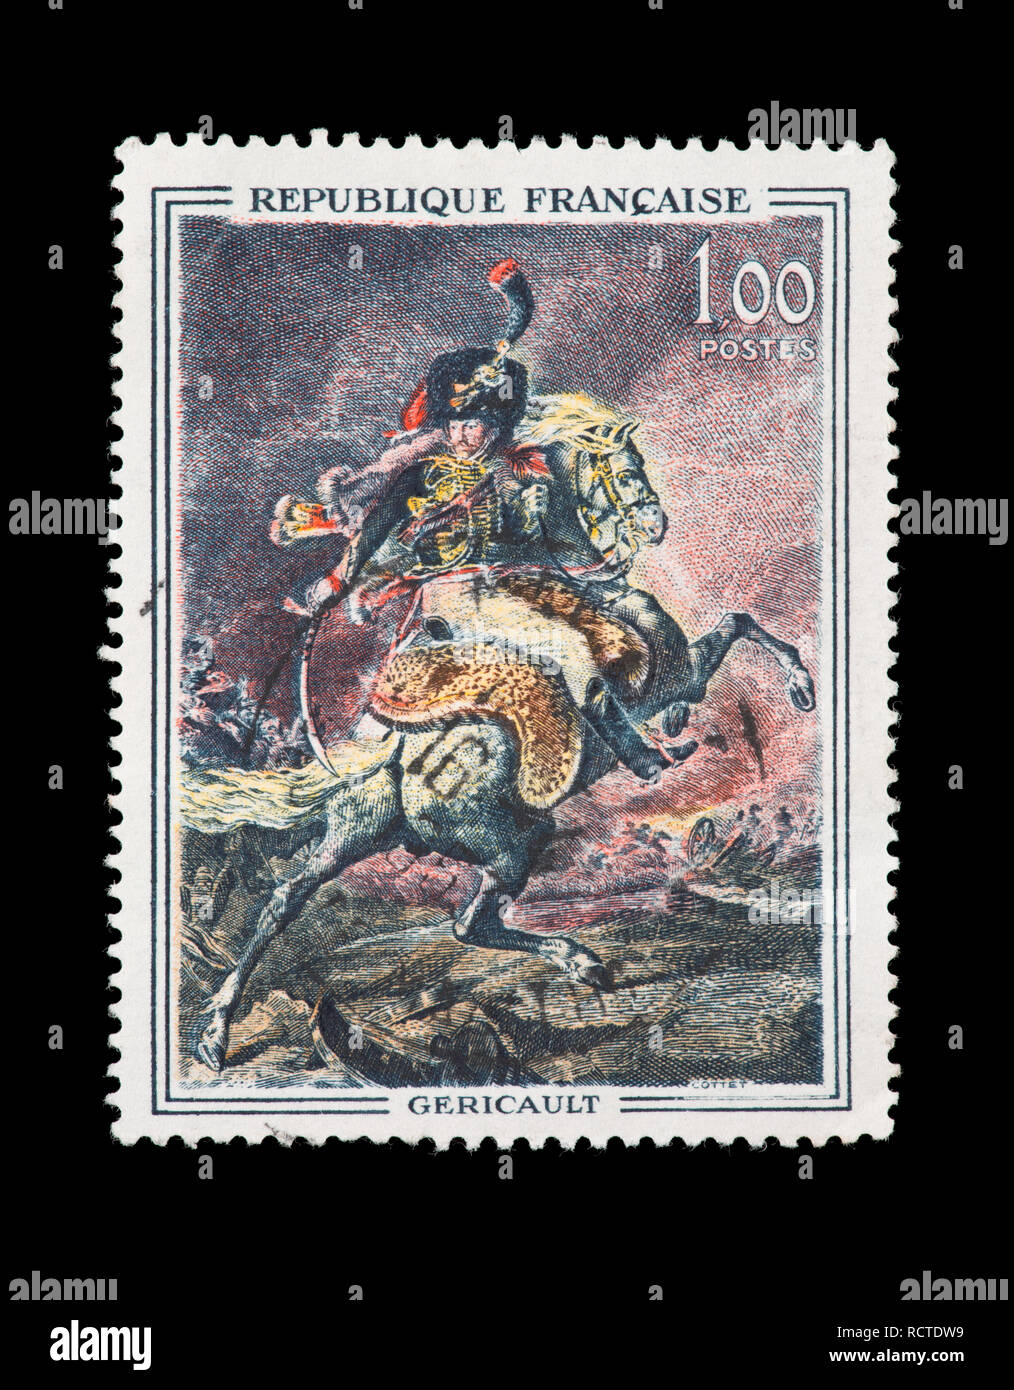 Postage stamp from France depicting the Theodore Gericault painting Guards Officer on Horseback Stock Photo